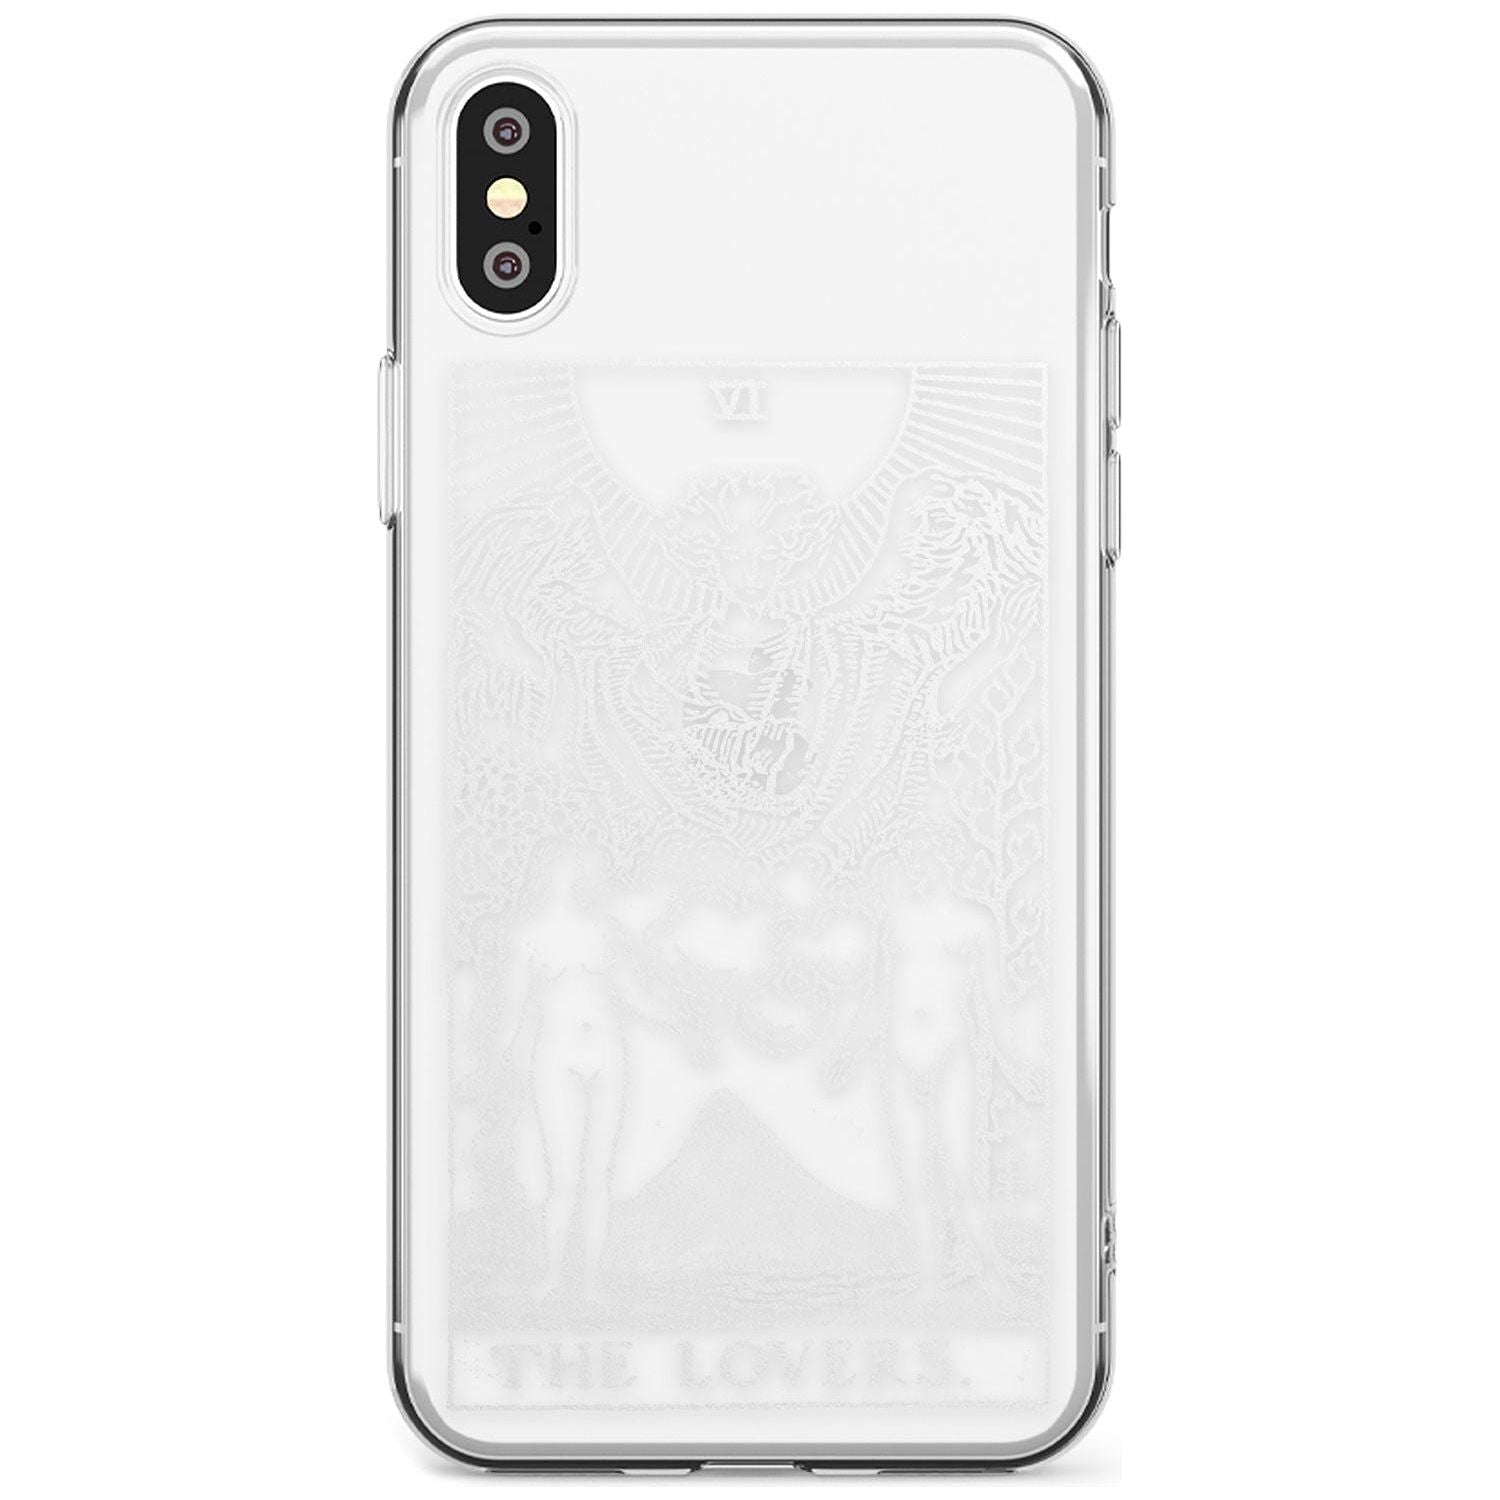 The Lovers Tarot Card - White Transparent Black Impact Phone Case for iPhone X XS Max XR